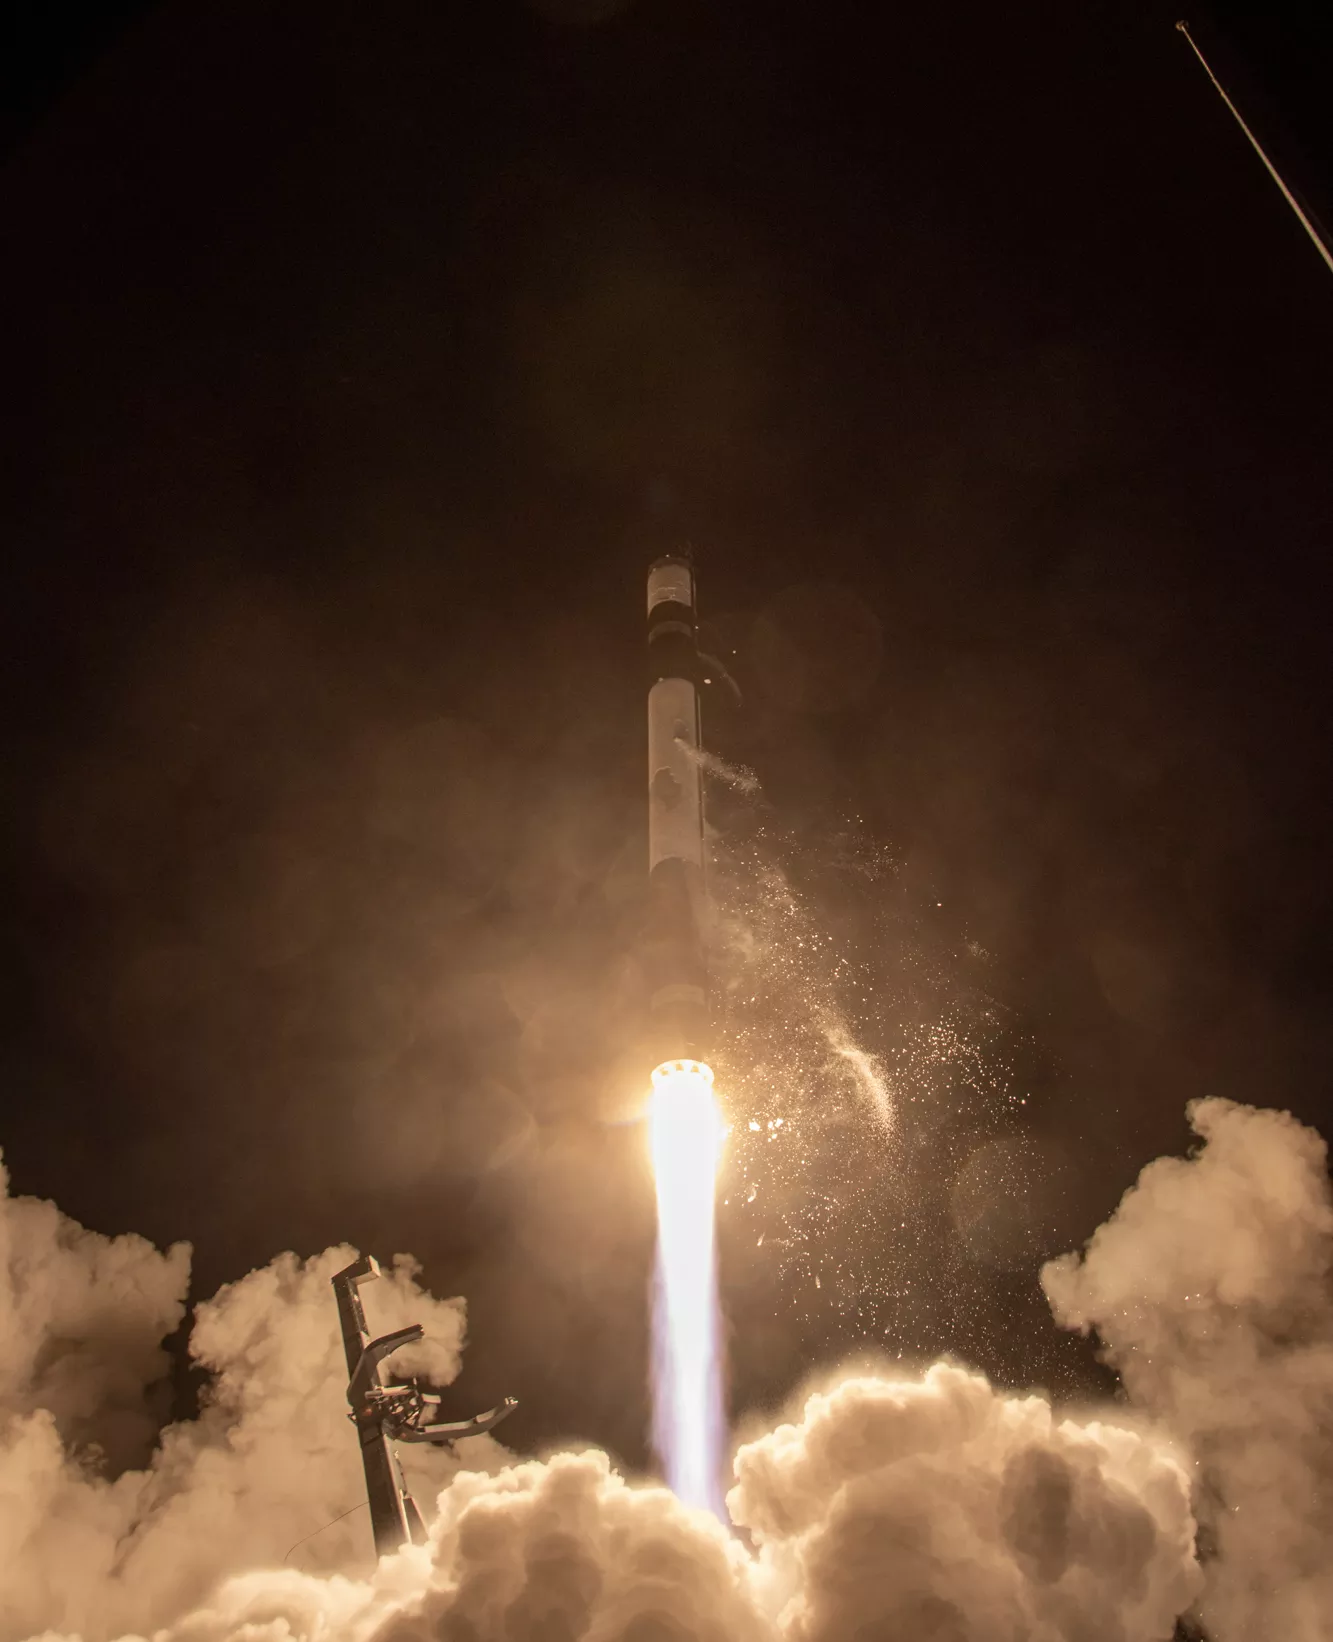 The rocket carrying General Atomics’ GAzelle satellite lifts off, illuminating the dark sky behind it.